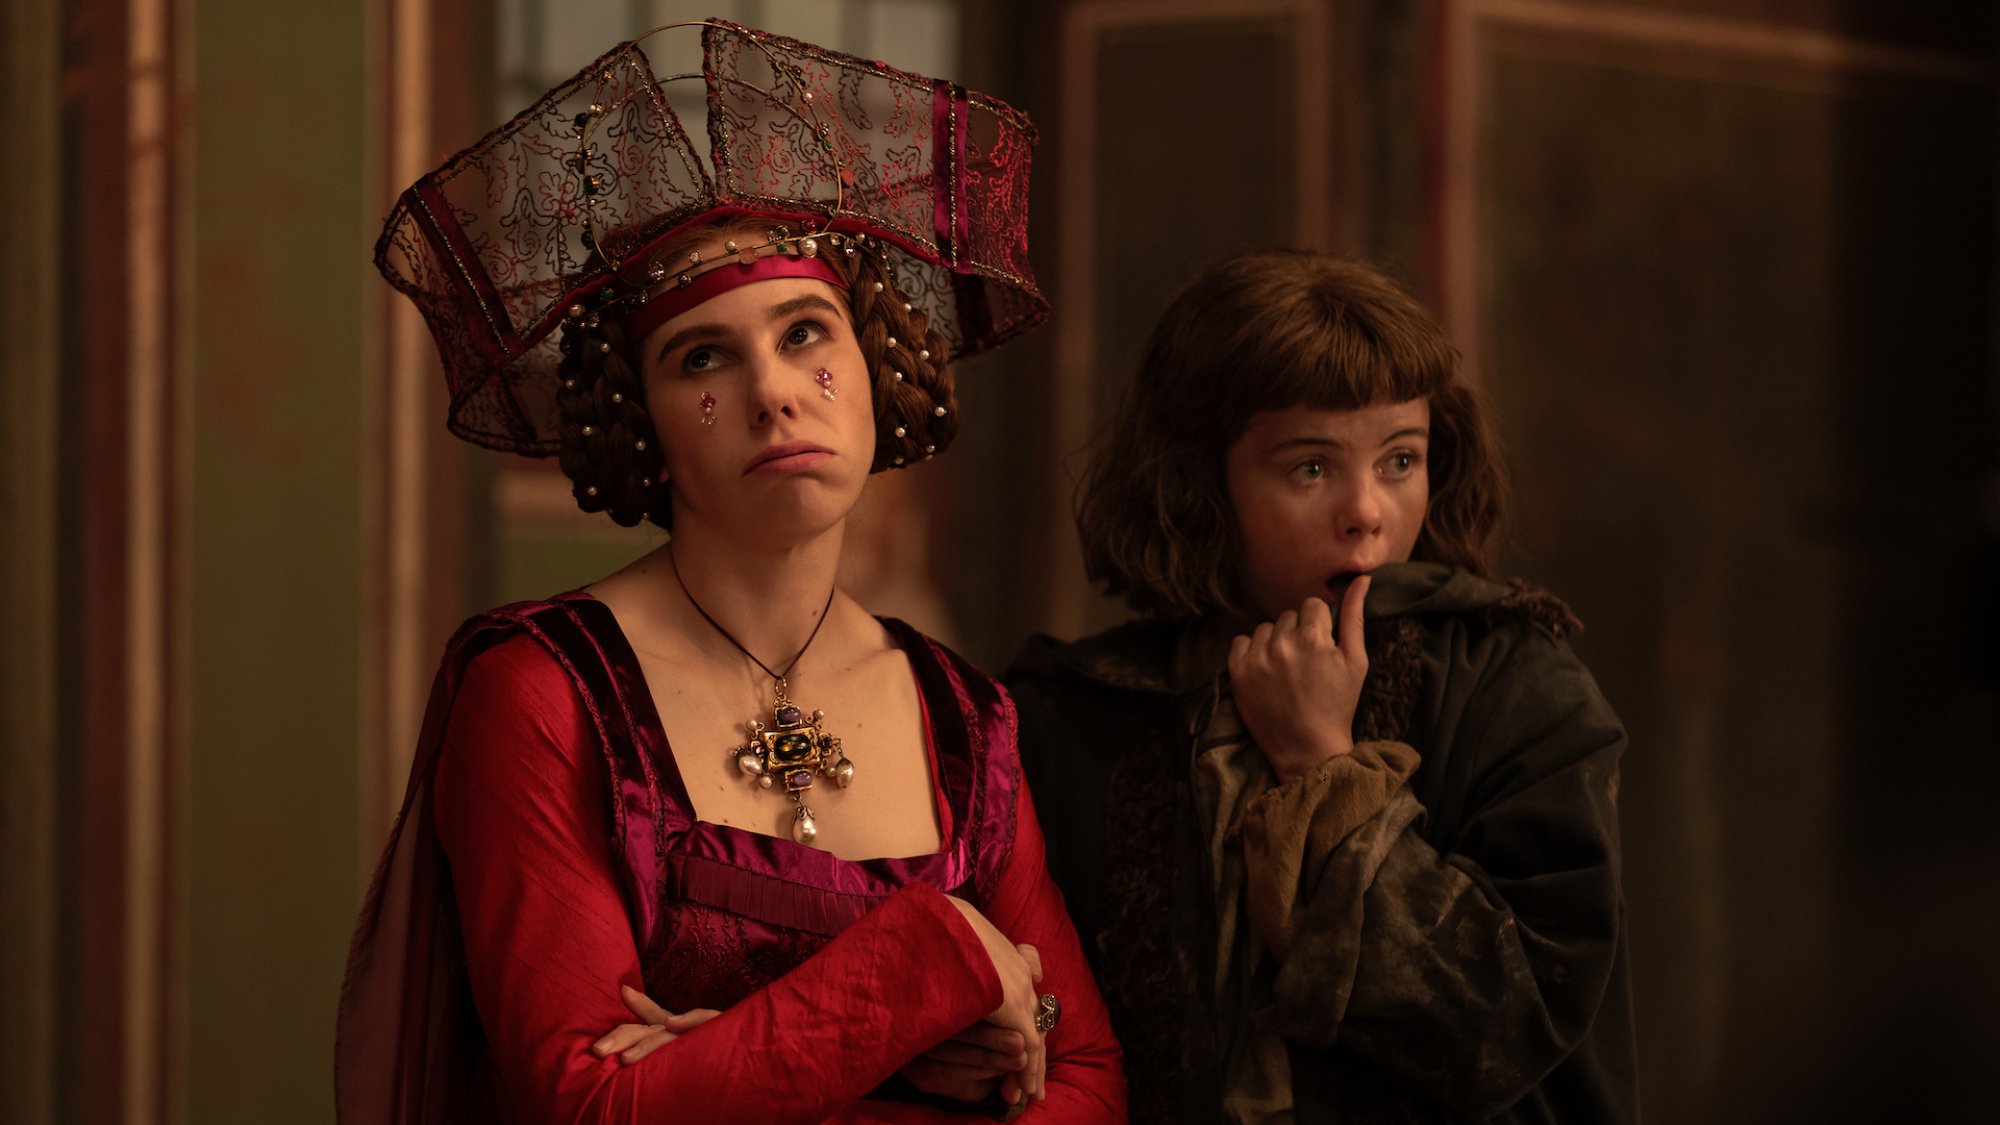 Zosia Mamet as Pampinea and Saoirse-Monica Jackson as Misia in "The Decameron"